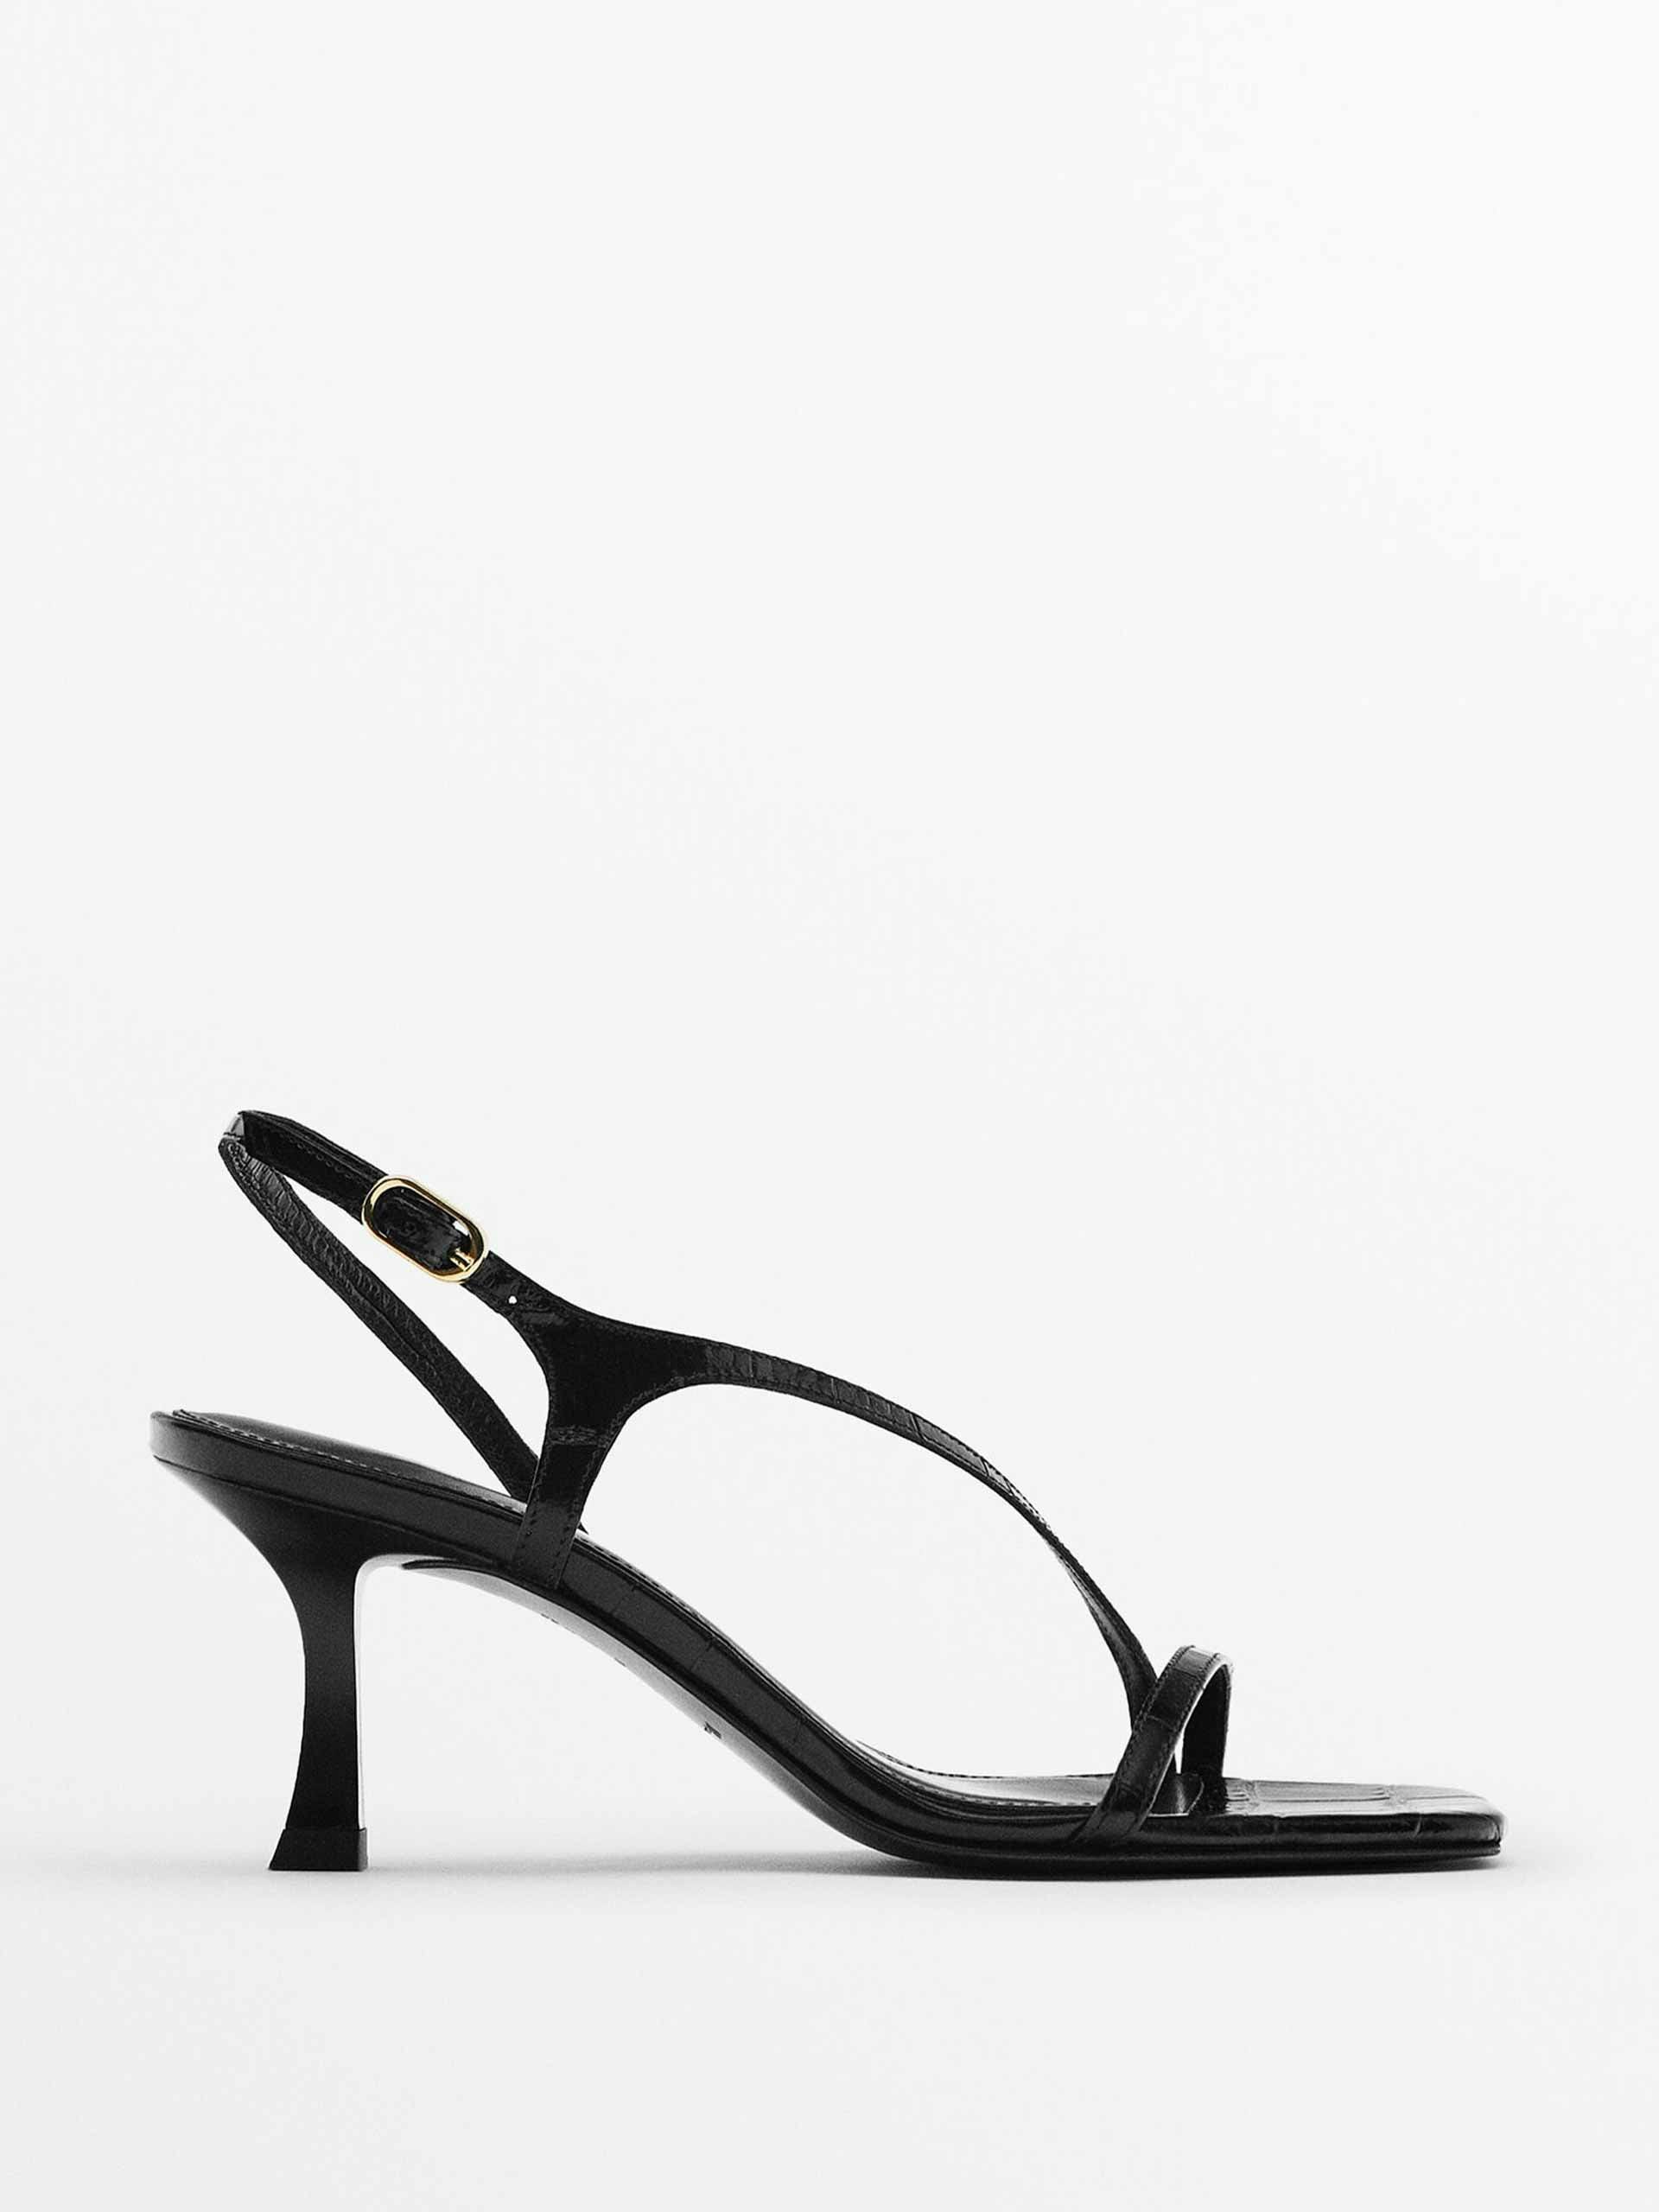 Black high-heel leather sandals with criss cross strap